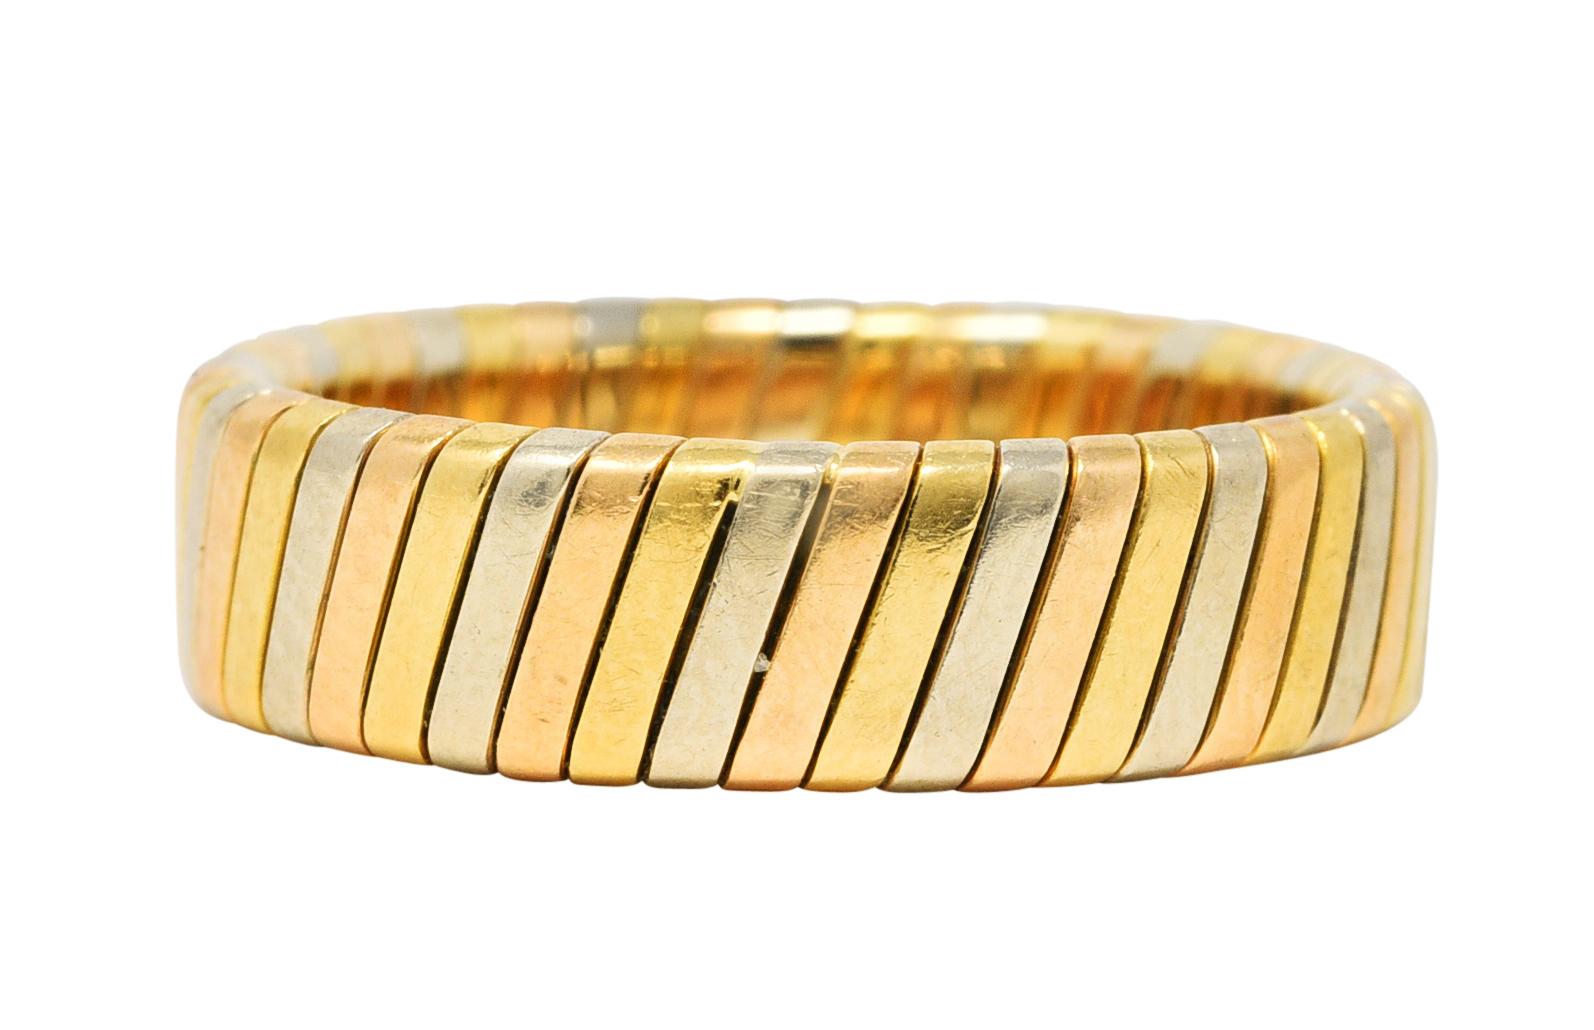 Band ring is deeply ridged with rose, yellow, and white gold

With Italian assay marks for 18 karat gold

Inscribed Made in Italy

Fully signed Bvlgari

From the vintage Tubogas collection

Ring Size: 4 & not sizable

Measures North to South 4.8 mm